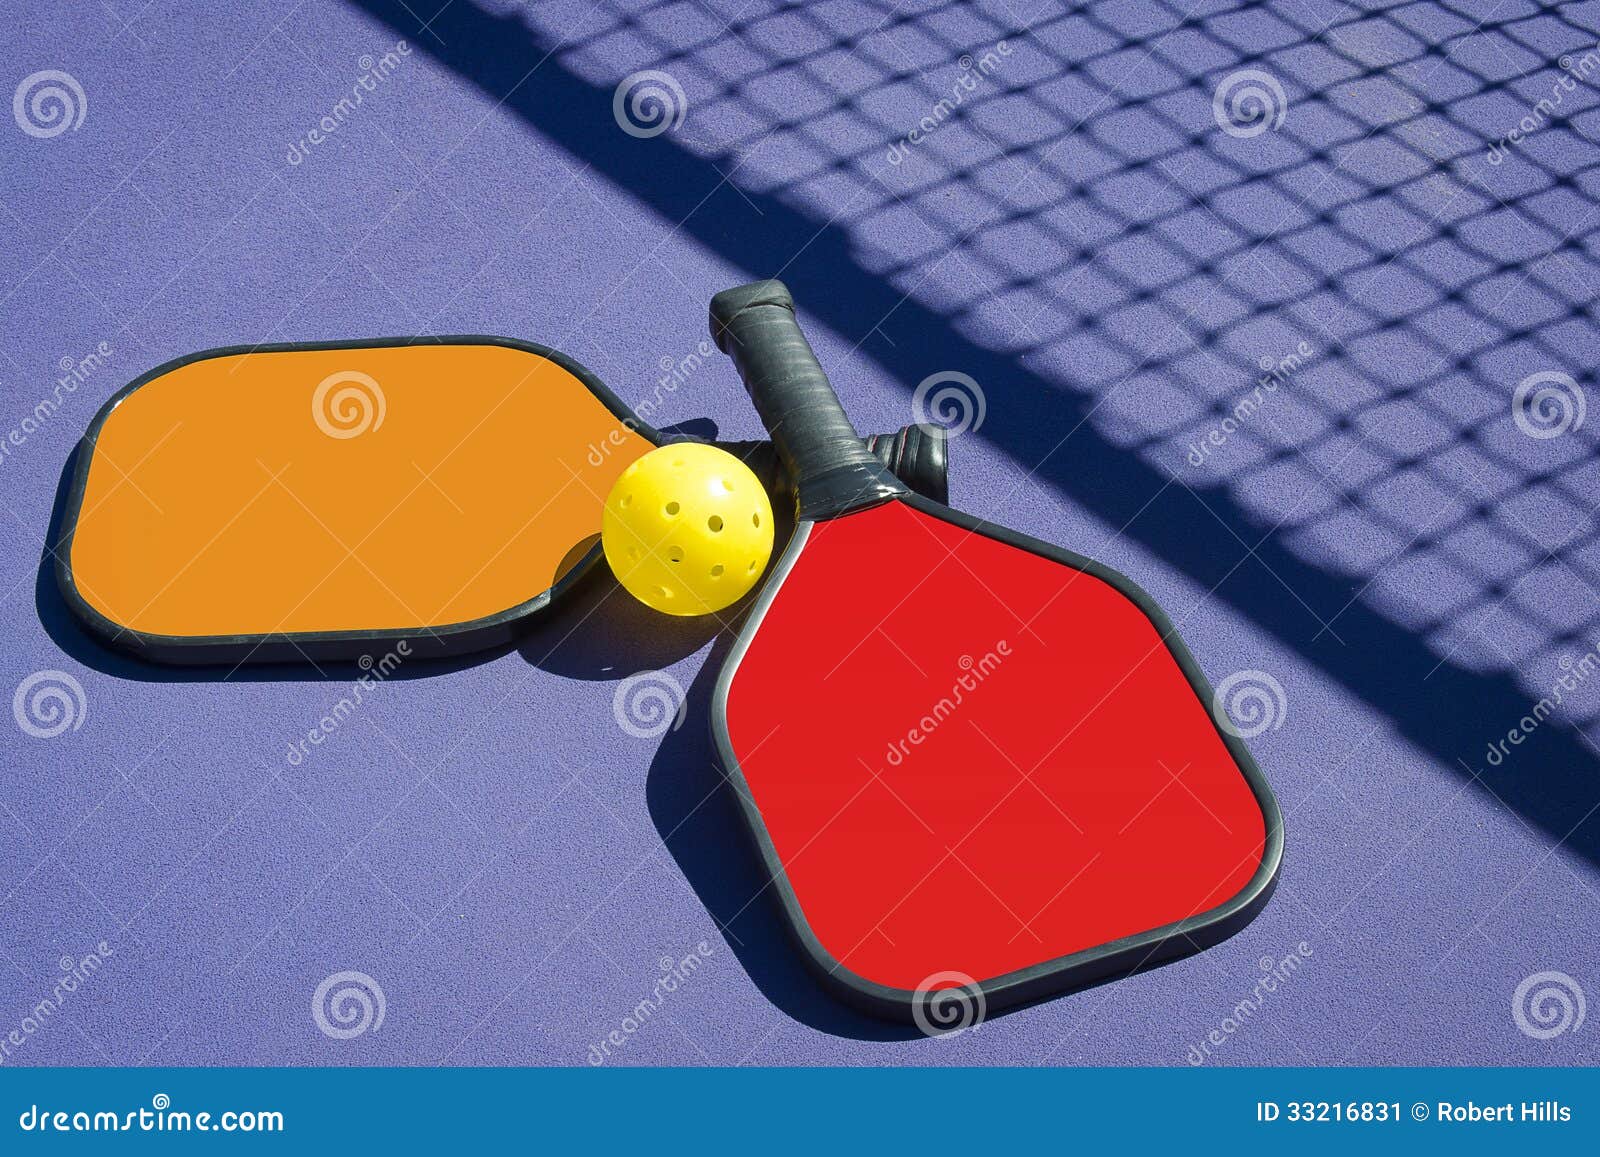 two pickleball paddles and a pickleball on court with net shadow